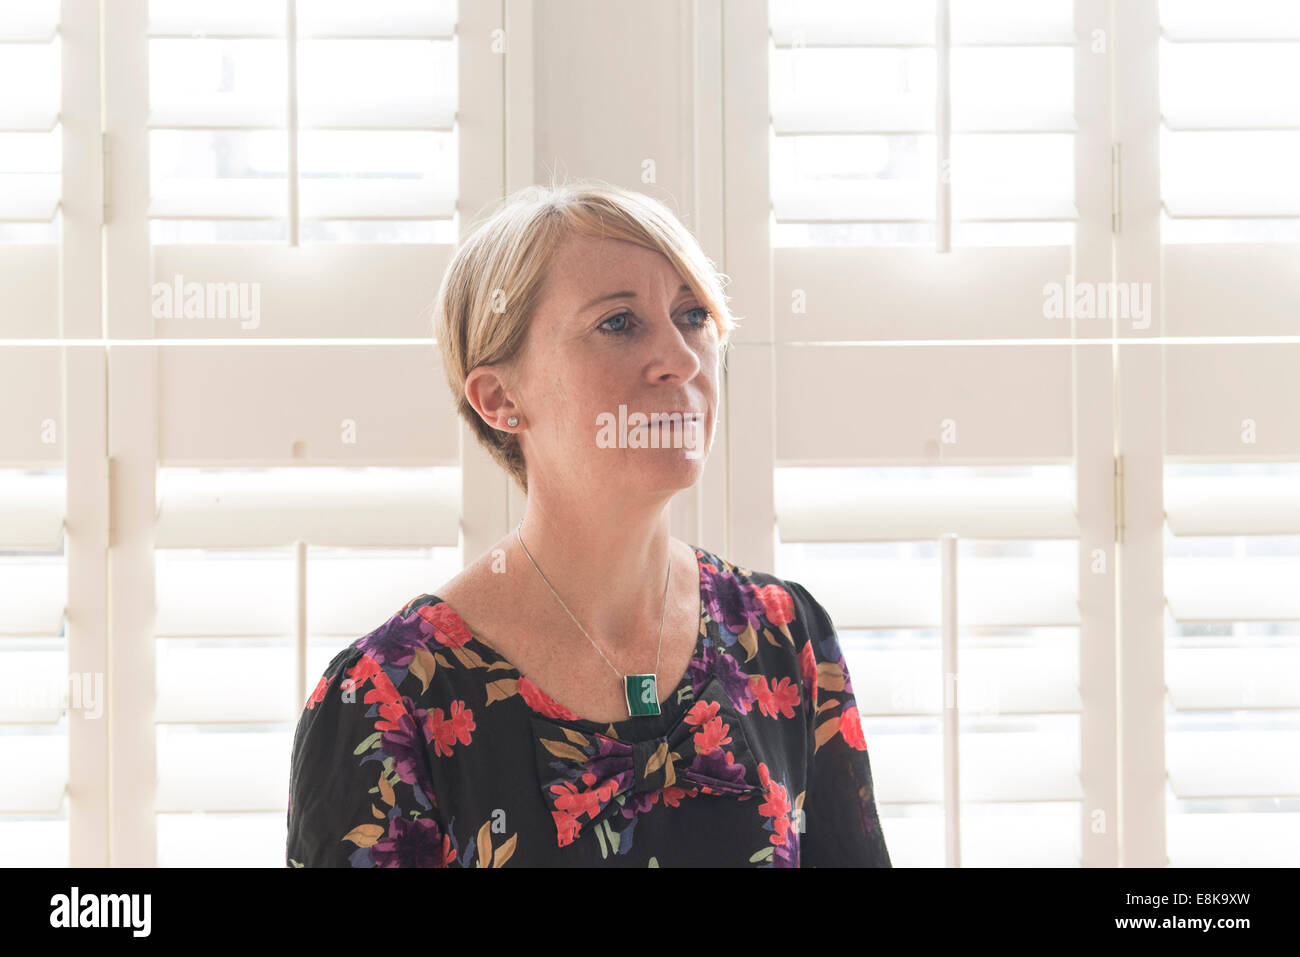 A business woman / mother with short hair stands by Venetian blinds in interesting light Stock Photo